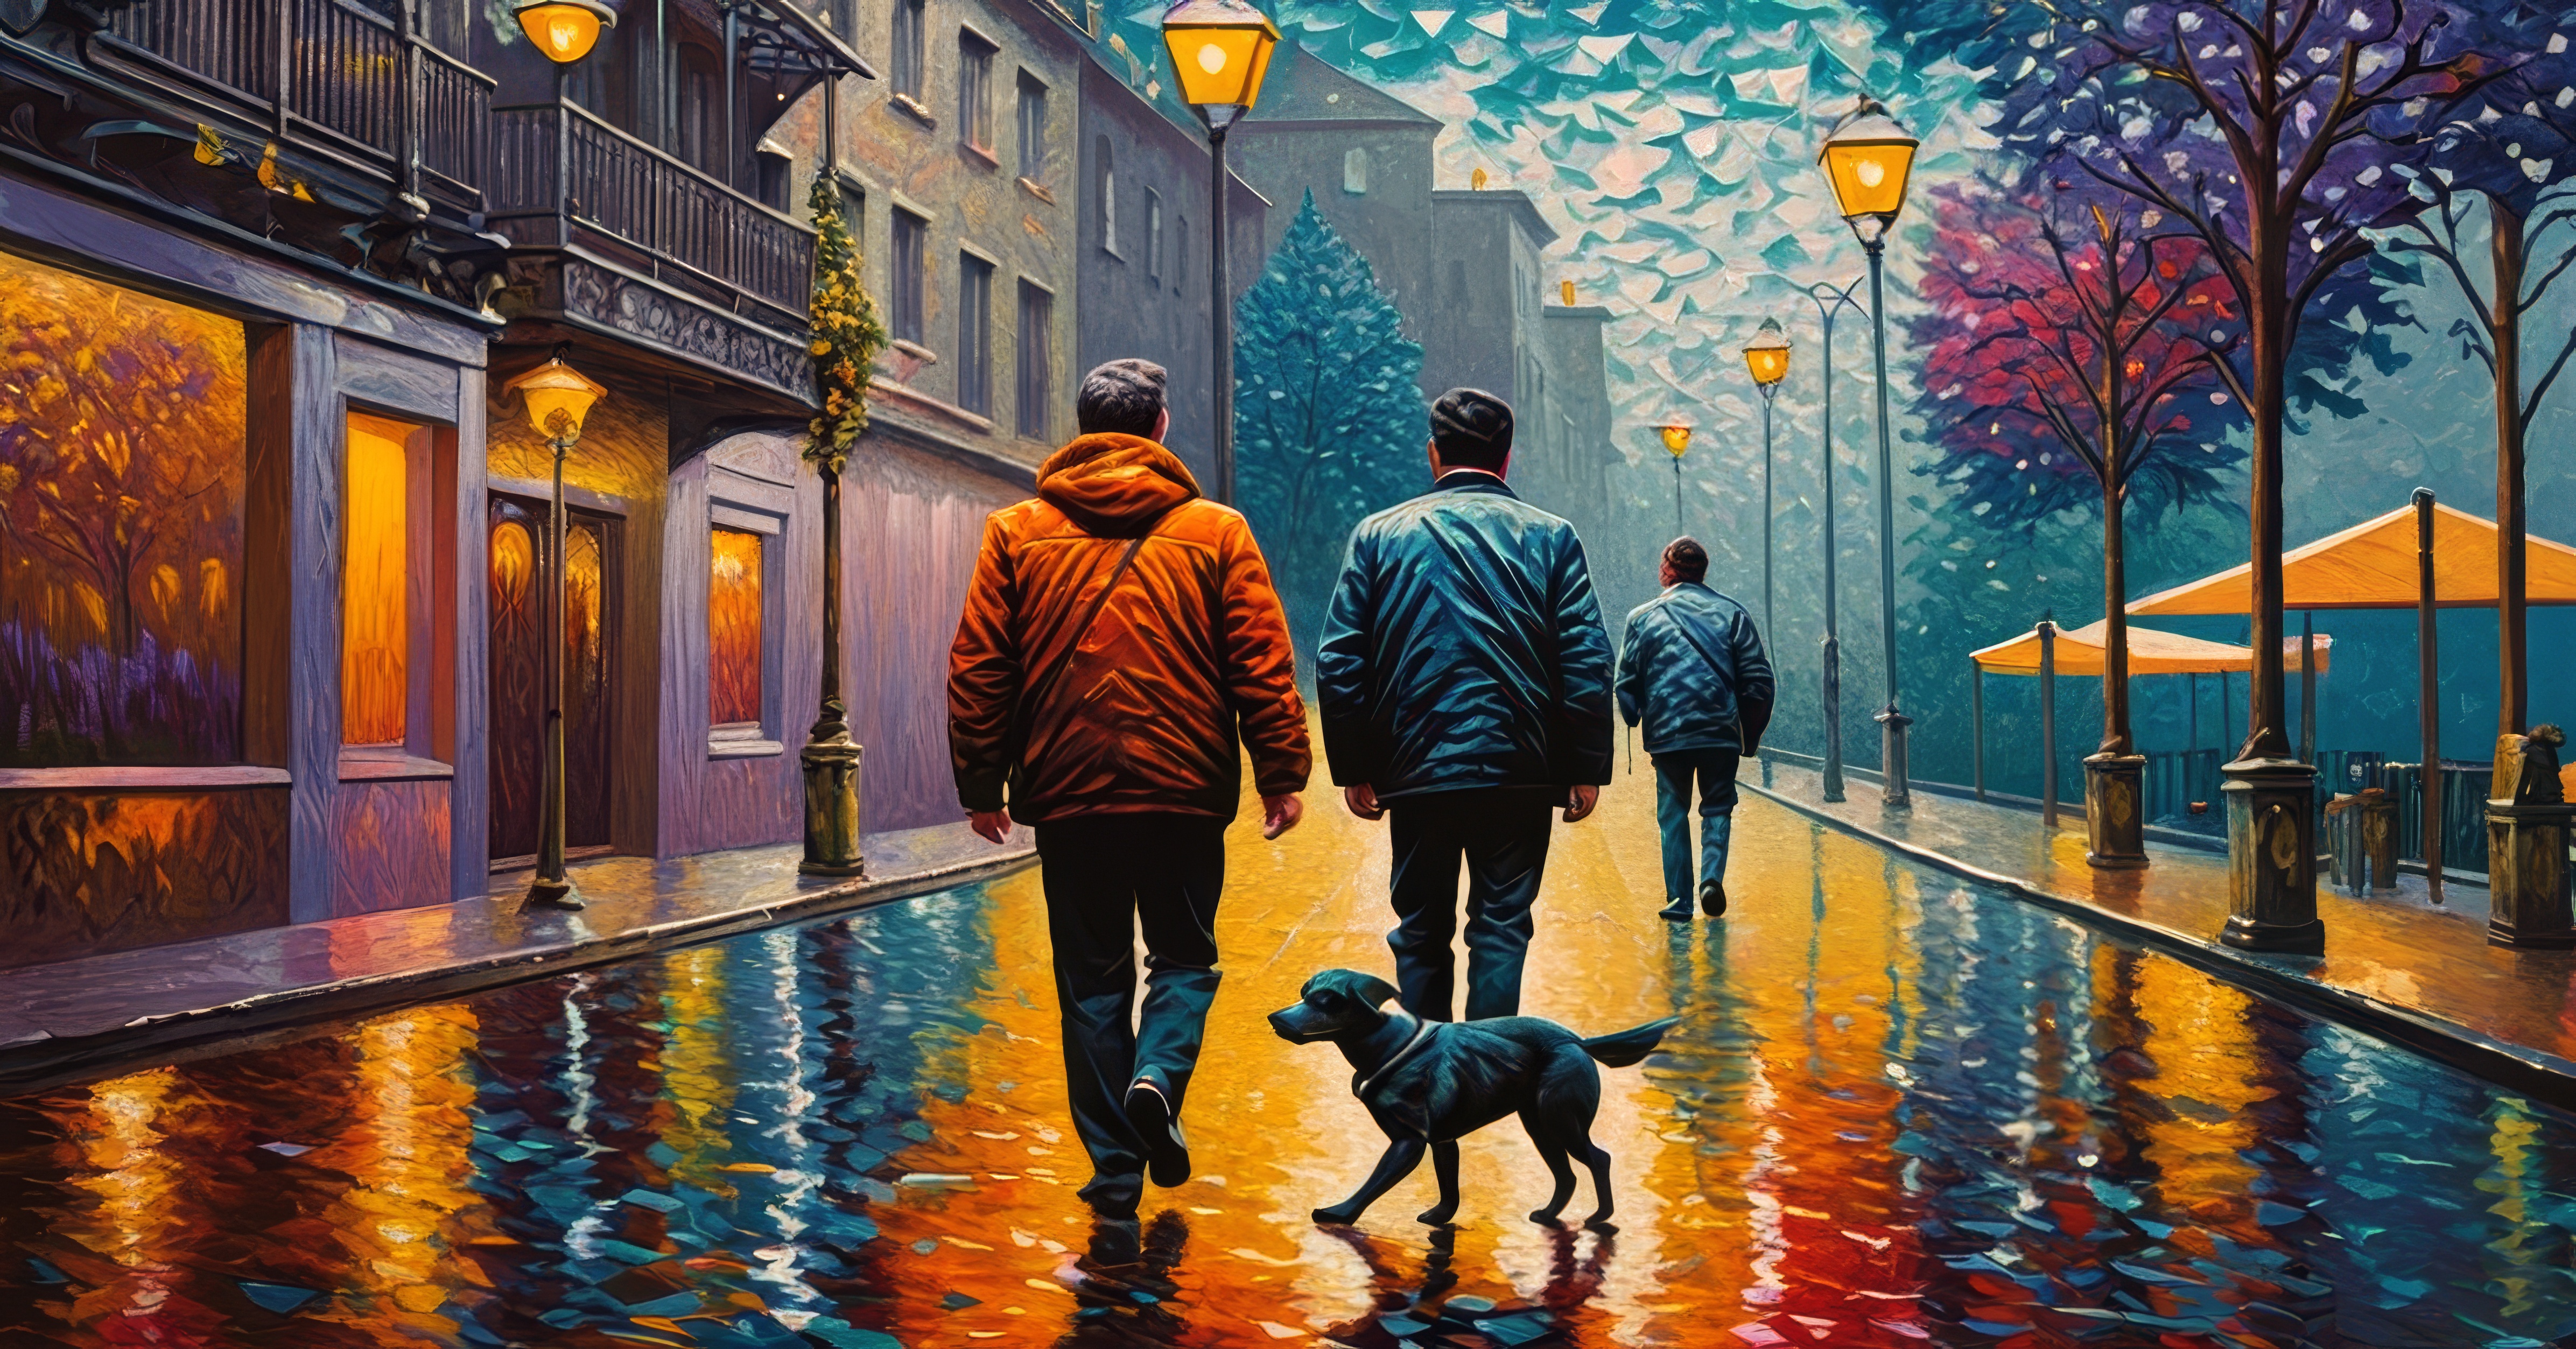 Two people walking down a street on a rainy night